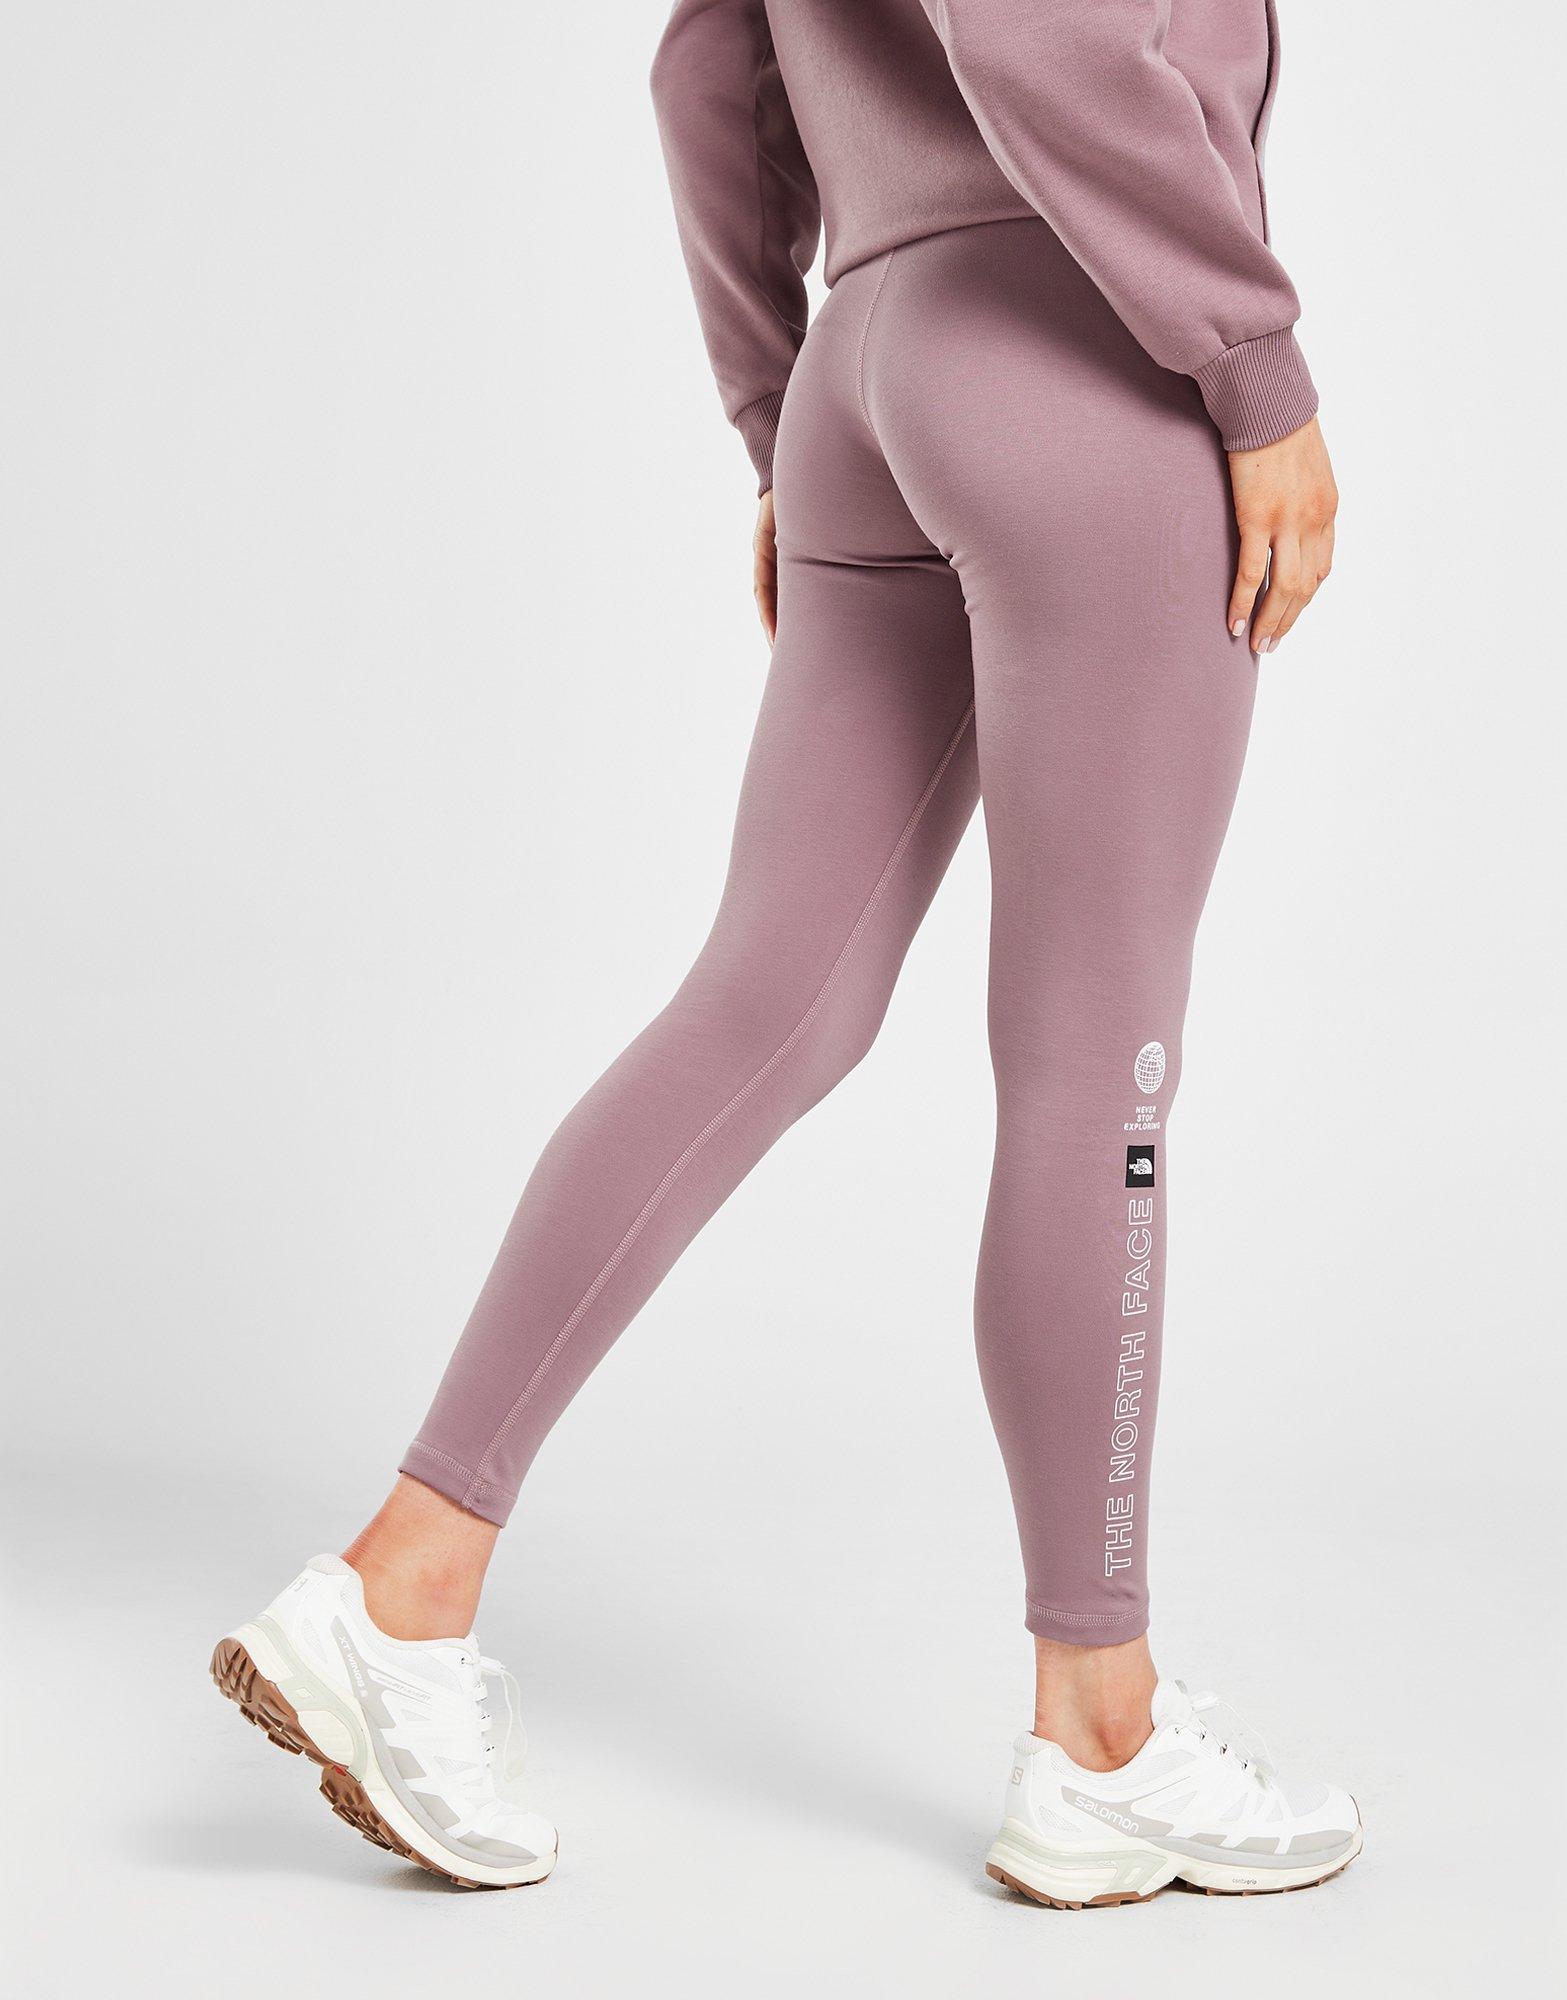 Grey The North Face Energy Coordinates Leggings - JD Sports Global